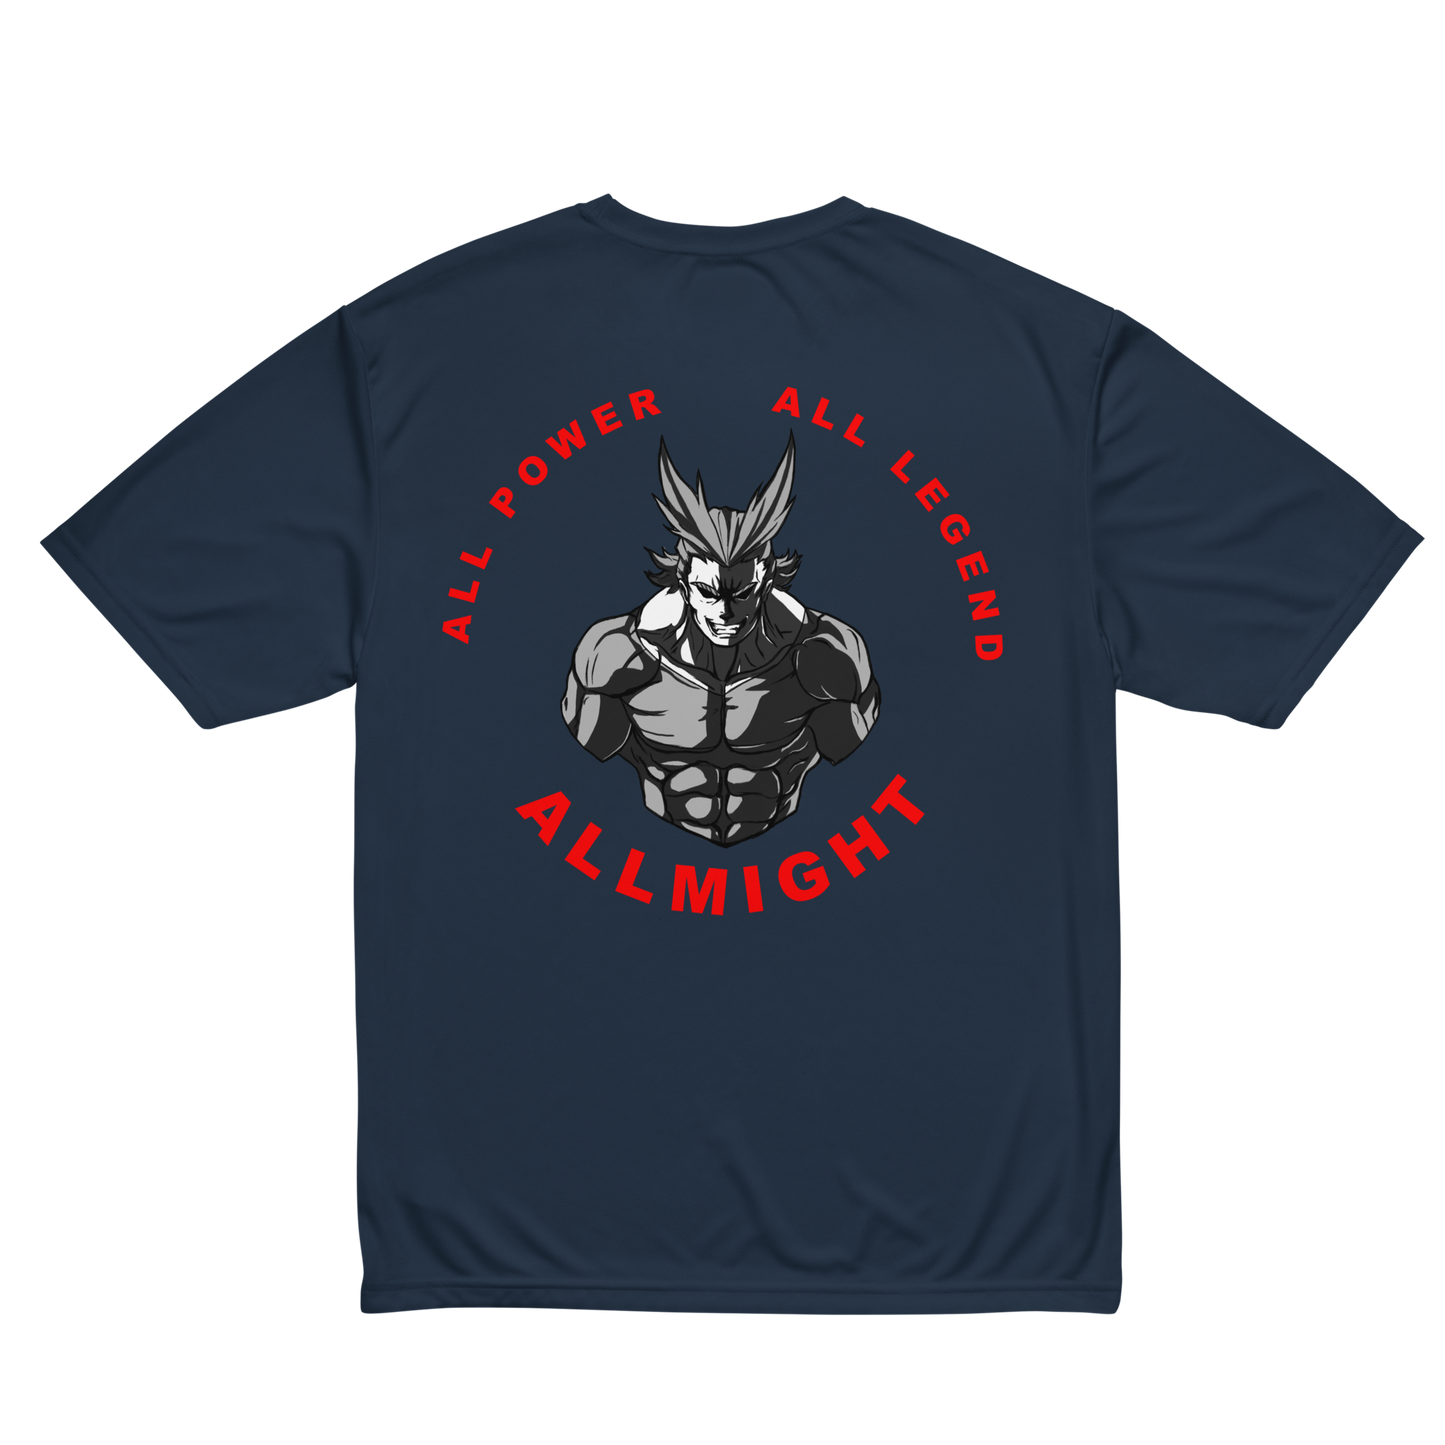 All Might Unisex Dry Fit T-shirt